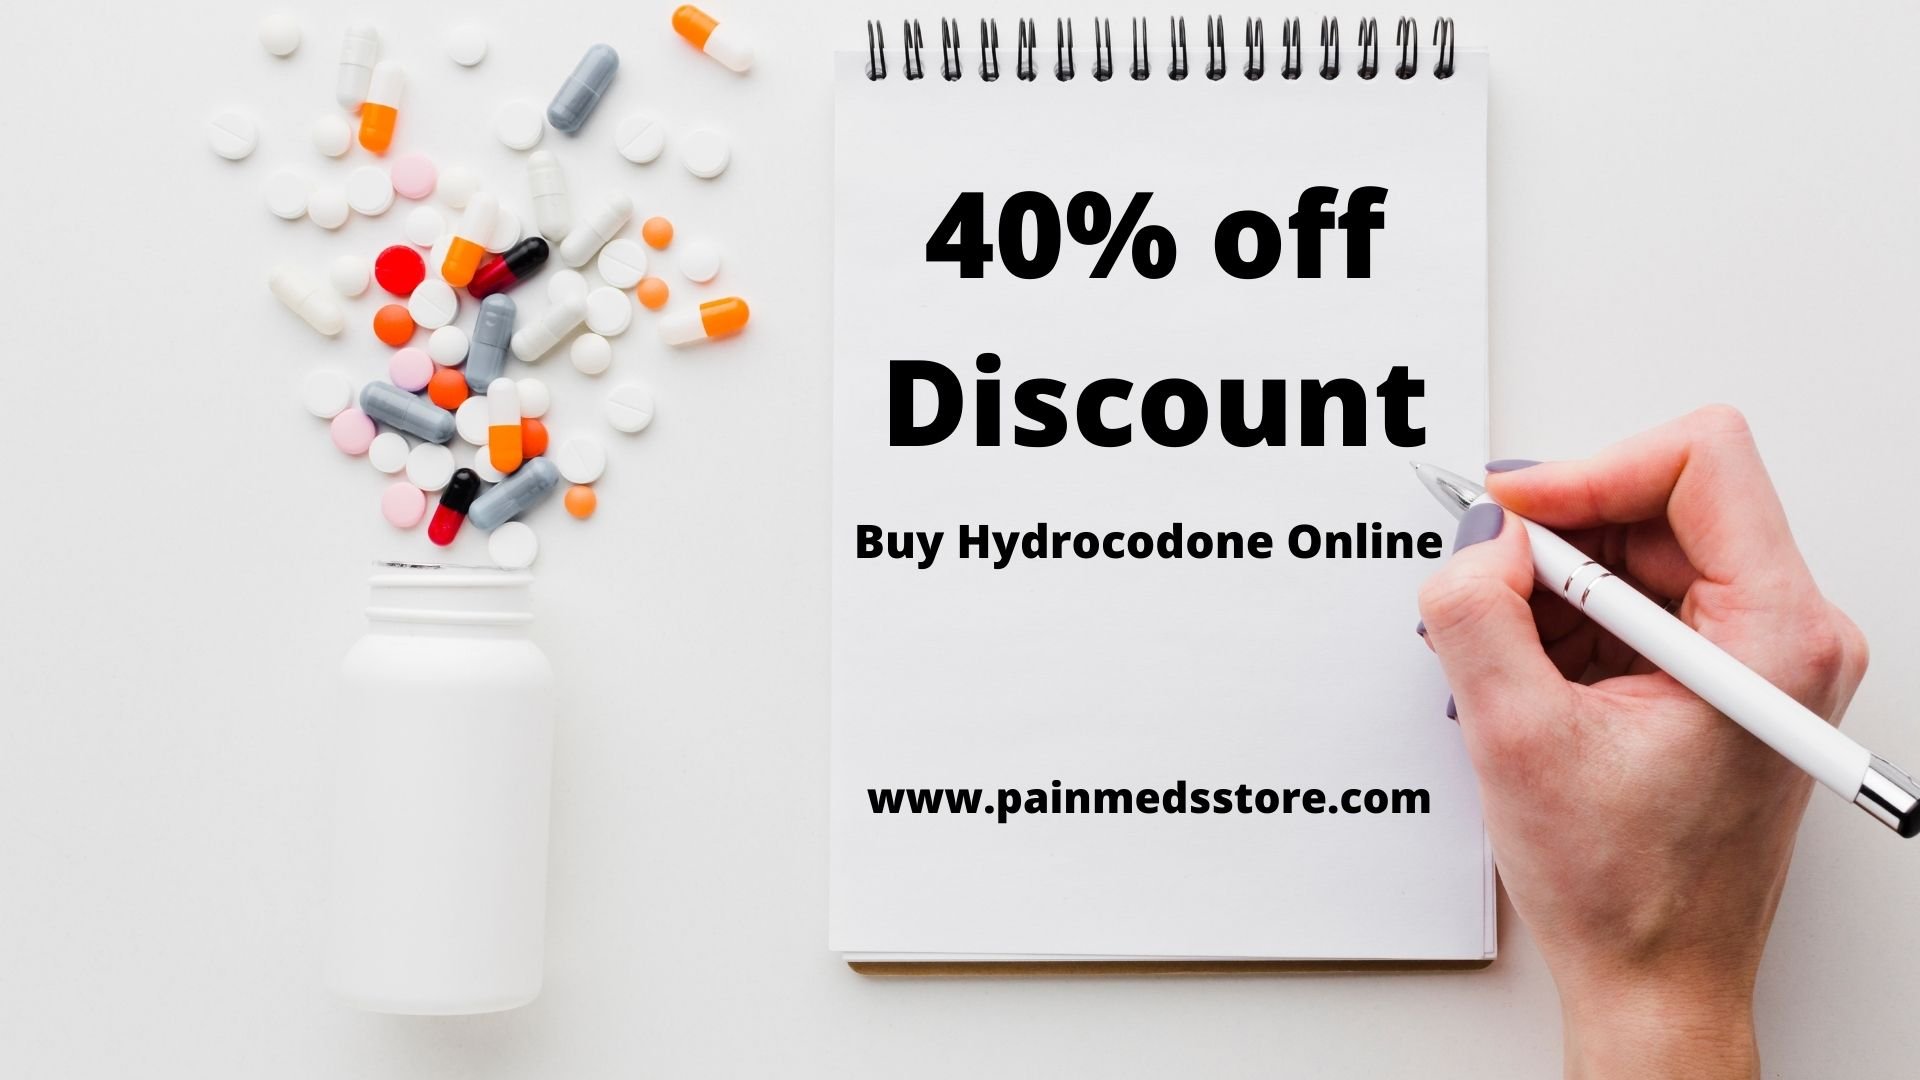 Buy percocet online, order percocet, how to buy percocet online usa cover